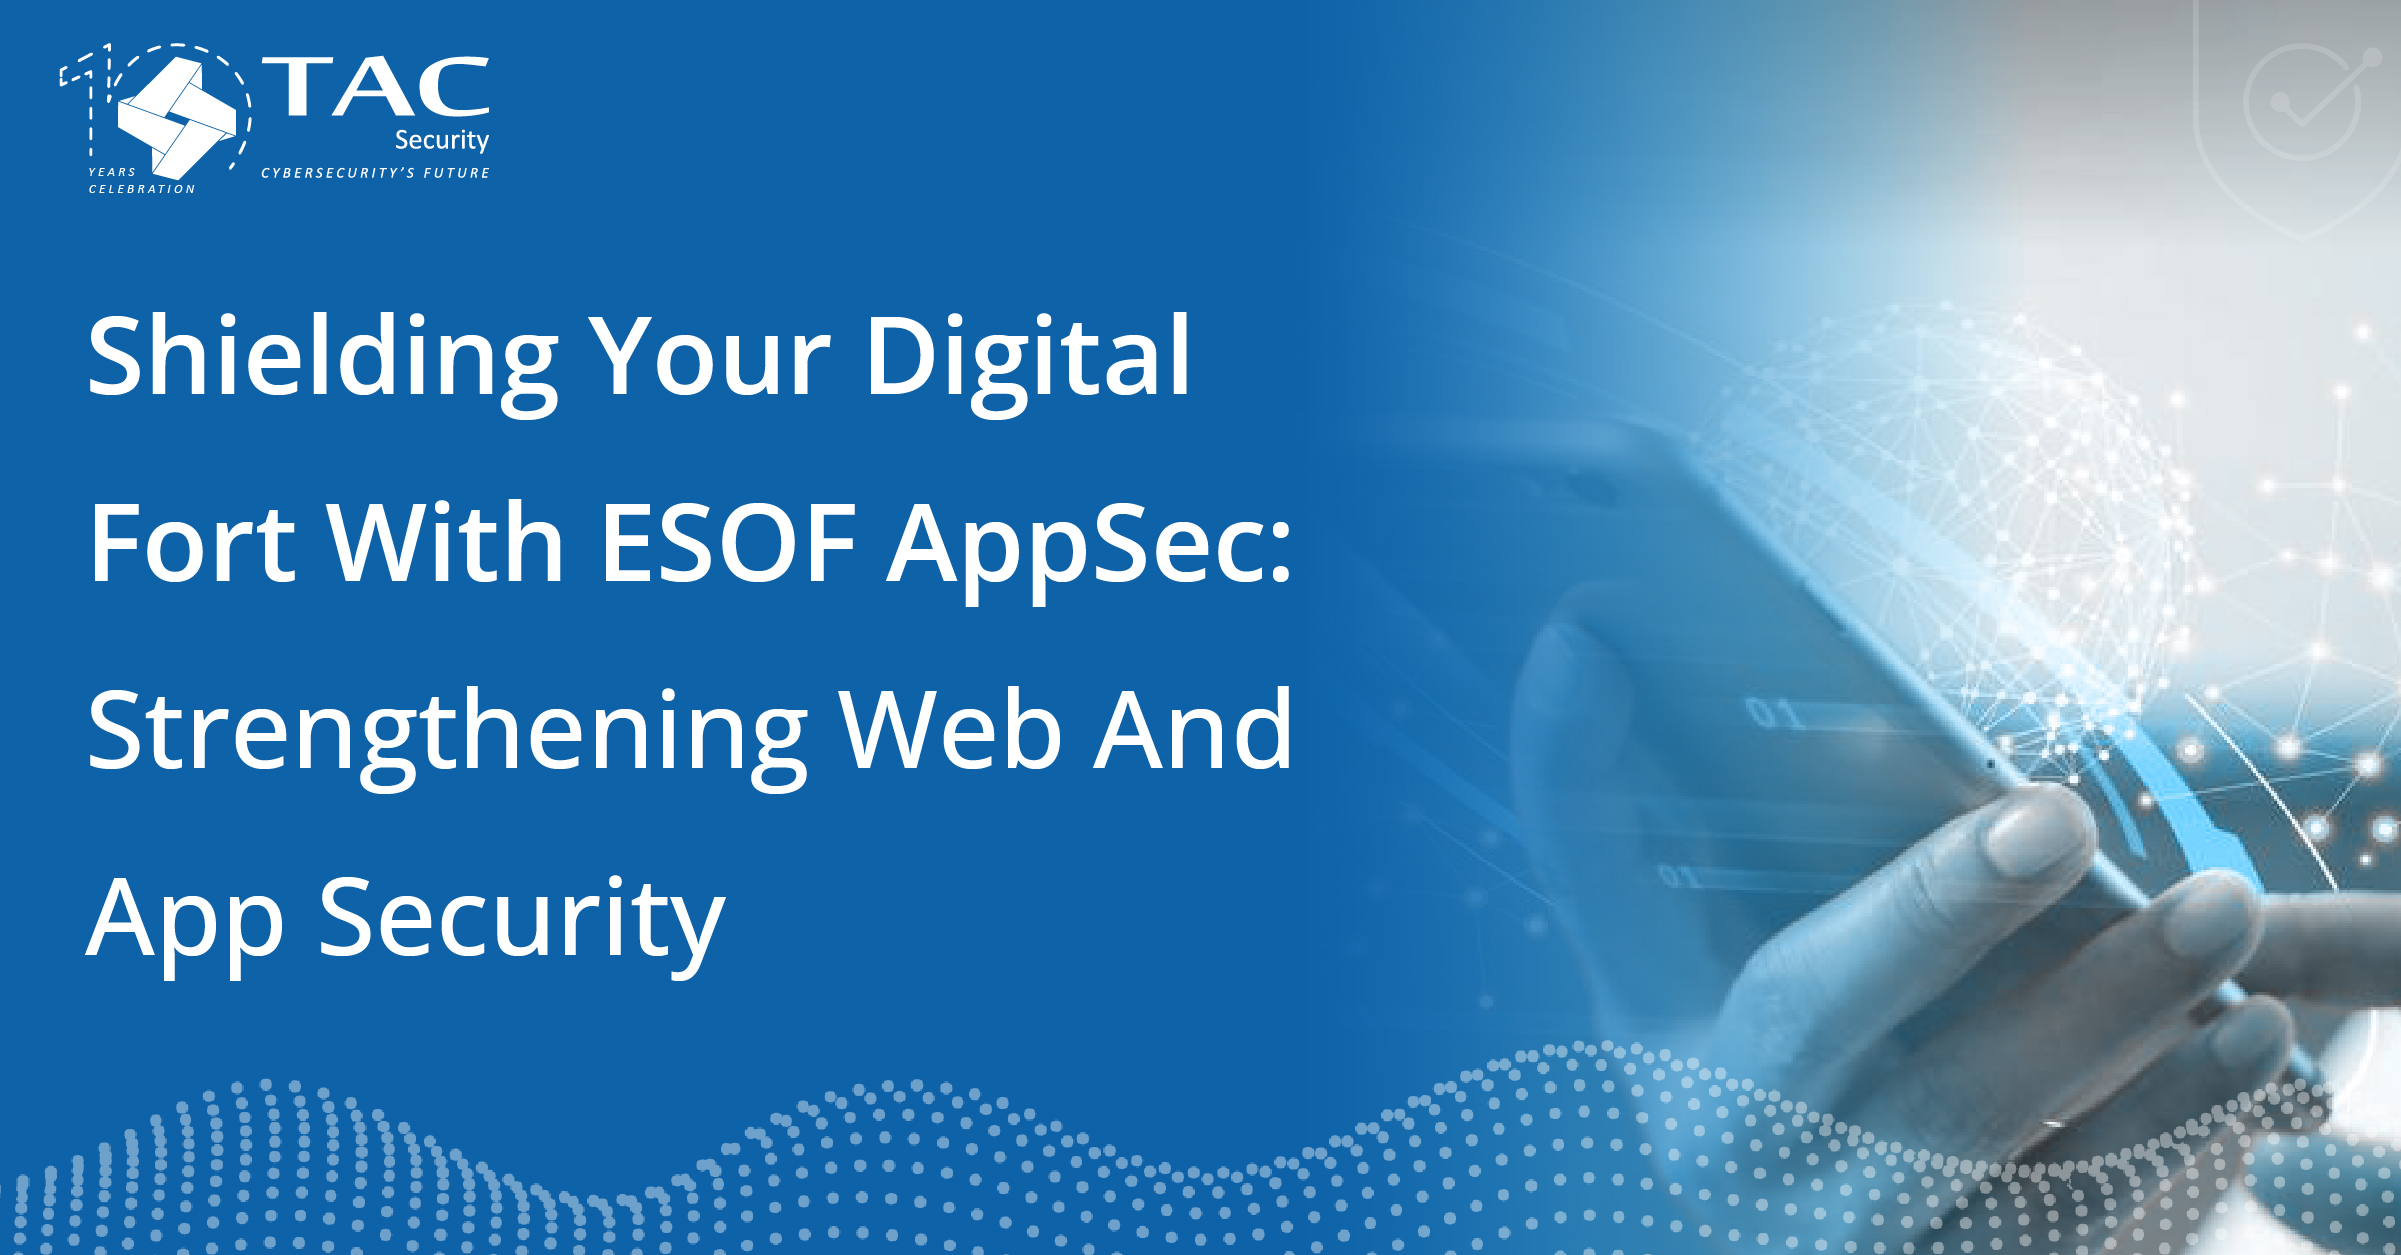 Shielding Your Digital Fort with ESOF AppSec Strengthening Web and App Security